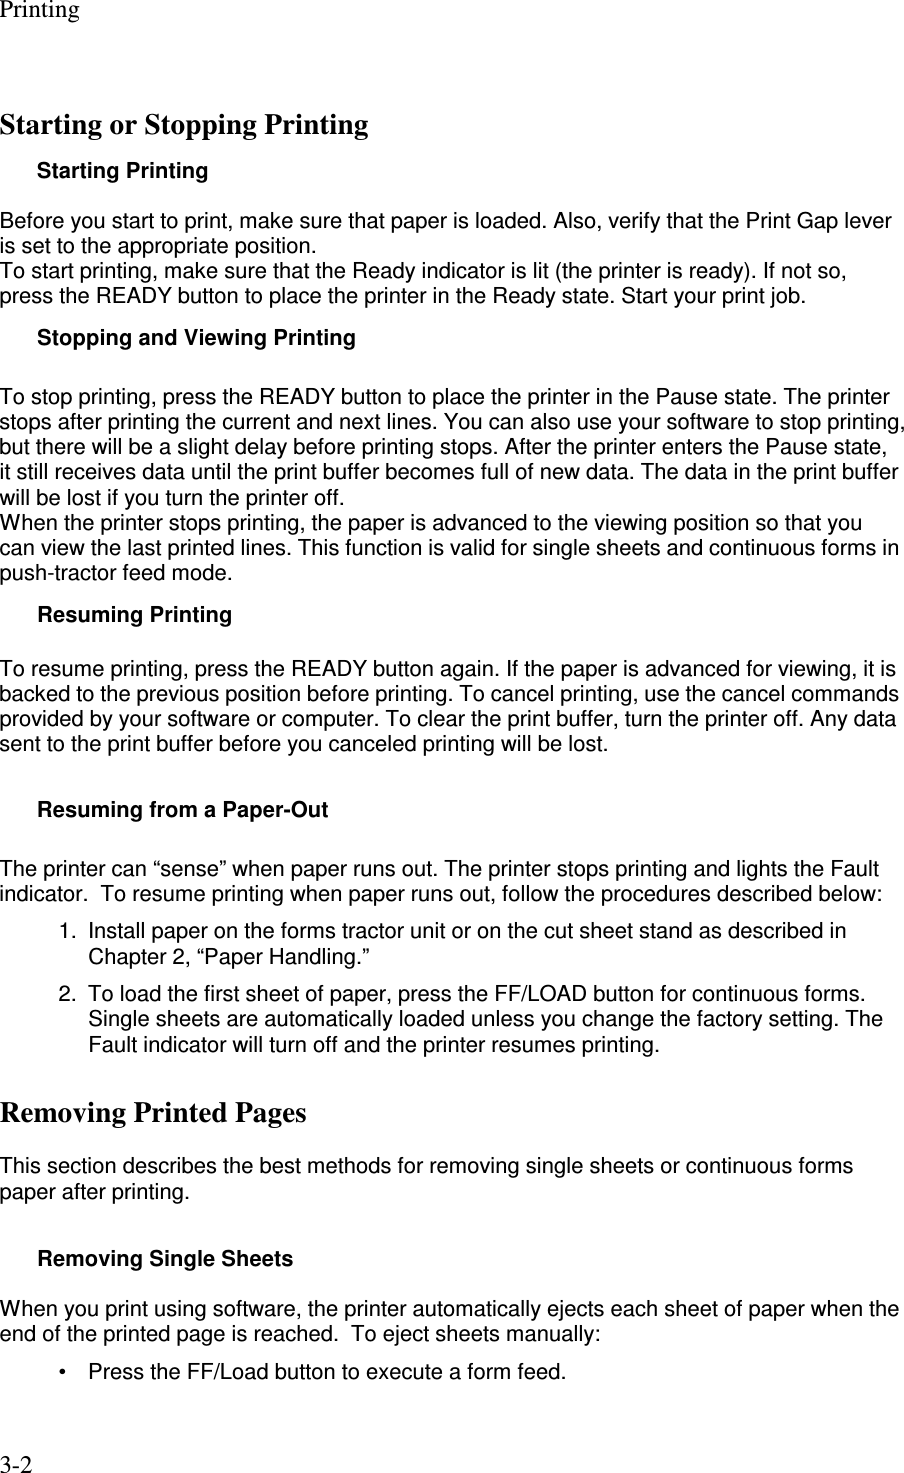 Printing 3-2 Starting or Stopping Printing Starting Printing  Before you start to print, make sure that paper is loaded. Also, verify that the Print Gap lever is set to the appropriate position. To start printing, make sure that the Ready indicator is lit (the printer is ready). If not so, press the READY button to place the printer in the Ready state. Start your print job. Stopping and Viewing Printing  To stop printing, press the READY button to place the printer in the Pause state. The printer stops after printing the current and next lines. You can also use your software to stop printing, but there will be a slight delay before printing stops. After the printer enters the Pause state, it still receives data until the print buffer becomes full of new data. The data in the print buffer will be lost if you turn the printer off. When the printer stops printing, the paper is advanced to the viewing position so that you can view the last printed lines. This function is valid for single sheets and continuous forms in push-tractor feed mode. Resuming Printing  To resume printing, press the READY button again. If the paper is advanced for viewing, it is backed to the previous position before printing. To cancel printing, use the cancel commands provided by your software or computer. To clear the print buffer, turn the printer off. Any data sent to the print buffer before you canceled printing will be lost.        Resuming from a Paper-Out  The printer can “sense” when paper runs out. The printer stops printing and lights the Fault indicator.  To resume printing when paper runs out, follow the procedures described below: 1.  Install paper on the forms tractor unit or on the cut sheet stand as described in Chapter 2, “Paper Handling.” 2.  To load the first sheet of paper, press the FF/LOAD button for continuous forms. Single sheets are automatically loaded unless you change the factory setting. The Fault indicator will turn off and the printer resumes printing. Removing Printed Pages  This section describes the best methods for removing single sheets or continuous forms paper after printing.  Removing Single Sheets  When you print using software, the printer automatically ejects each sheet of paper when the end of the printed page is reached.  To eject sheets manually: •  Press the FF/Load button to execute a form feed.   